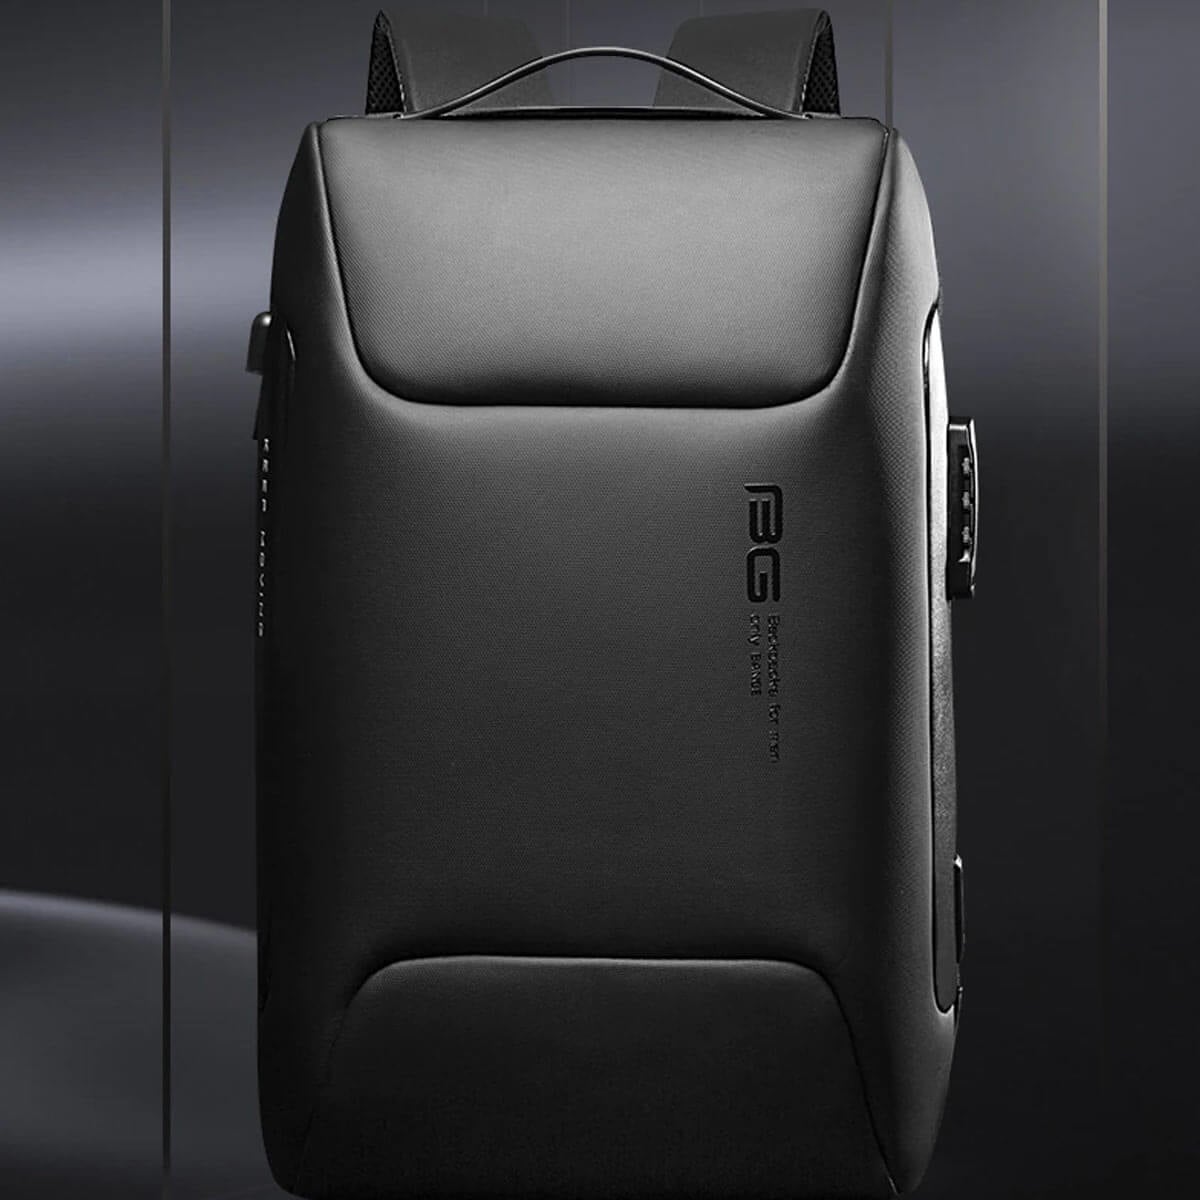 Waterproof backpack with lock for commuters